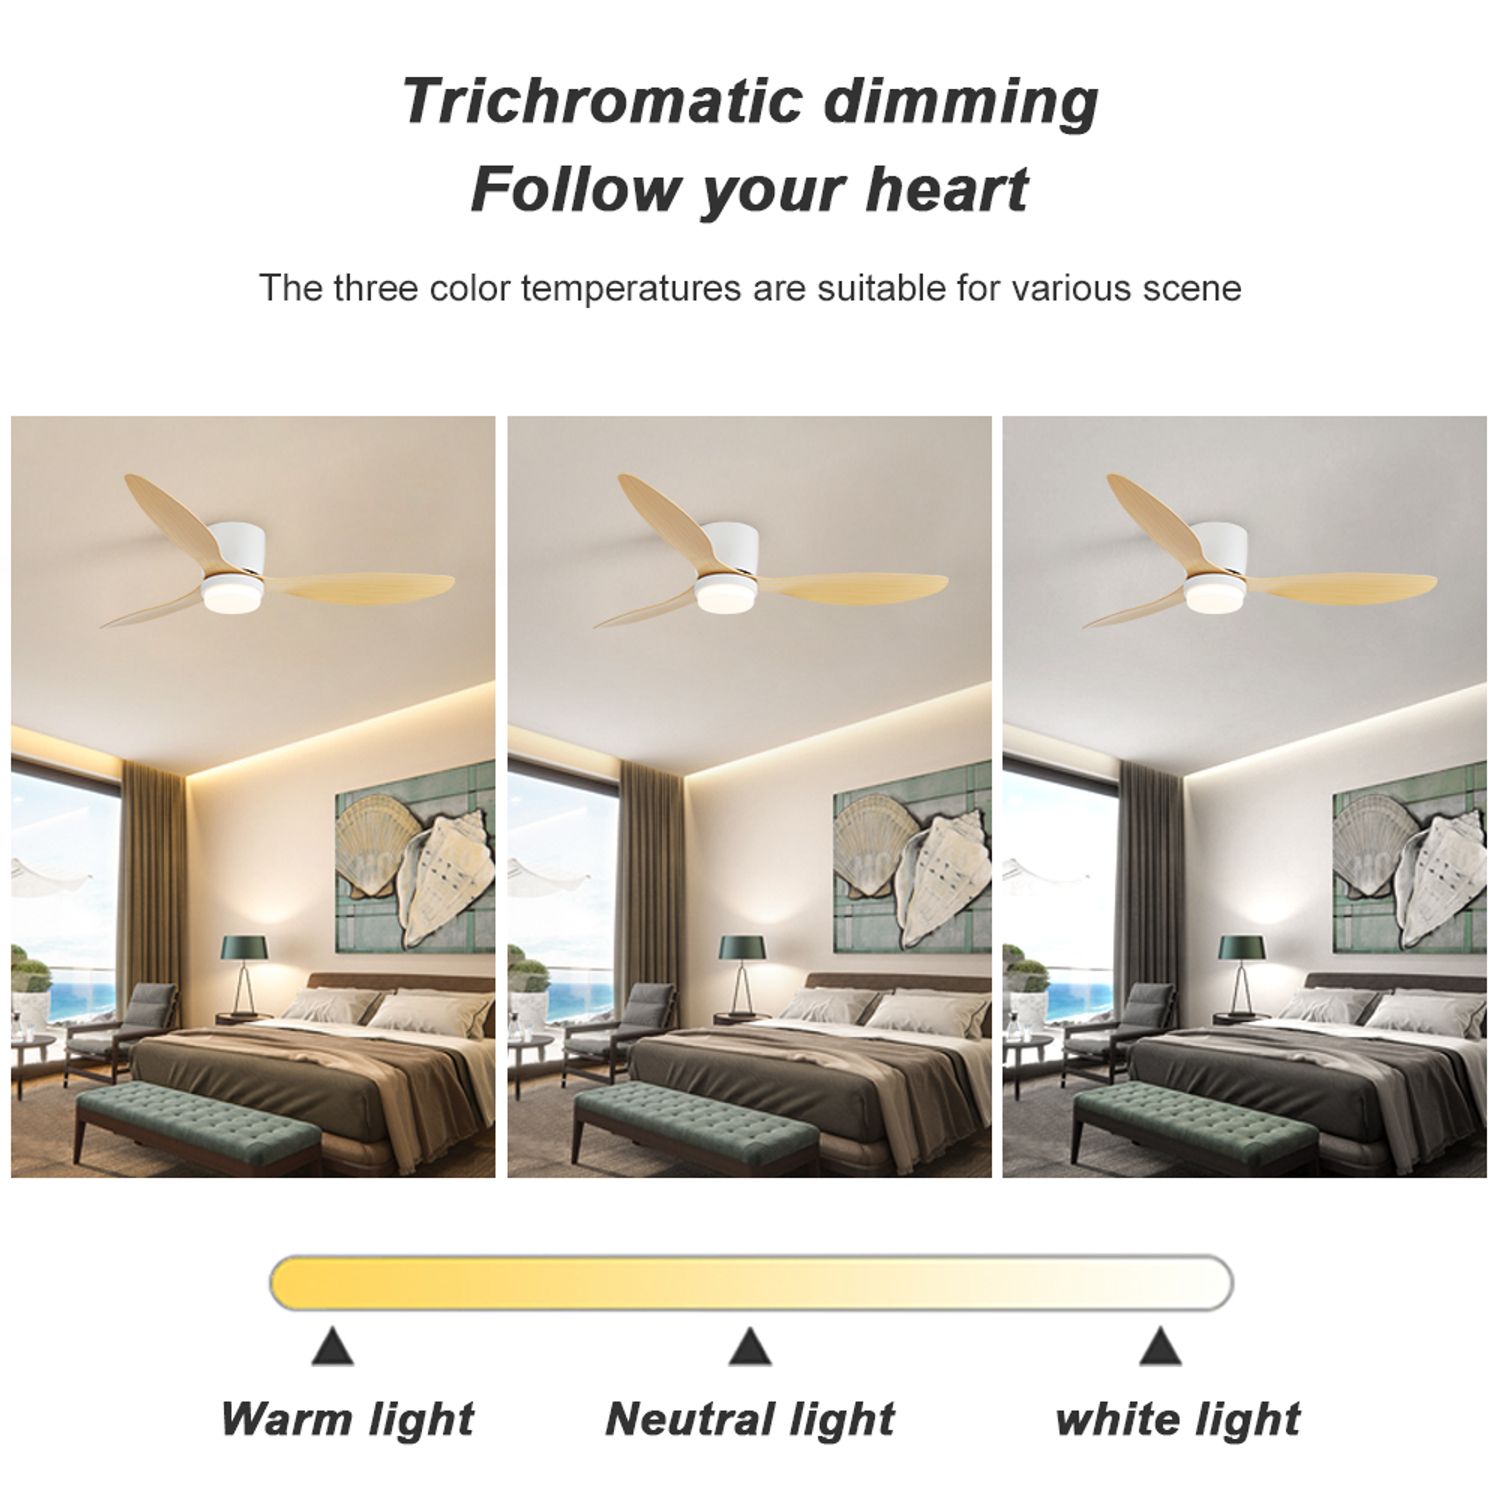 Dimmable led light integrated in the quiet modern ceiling fan